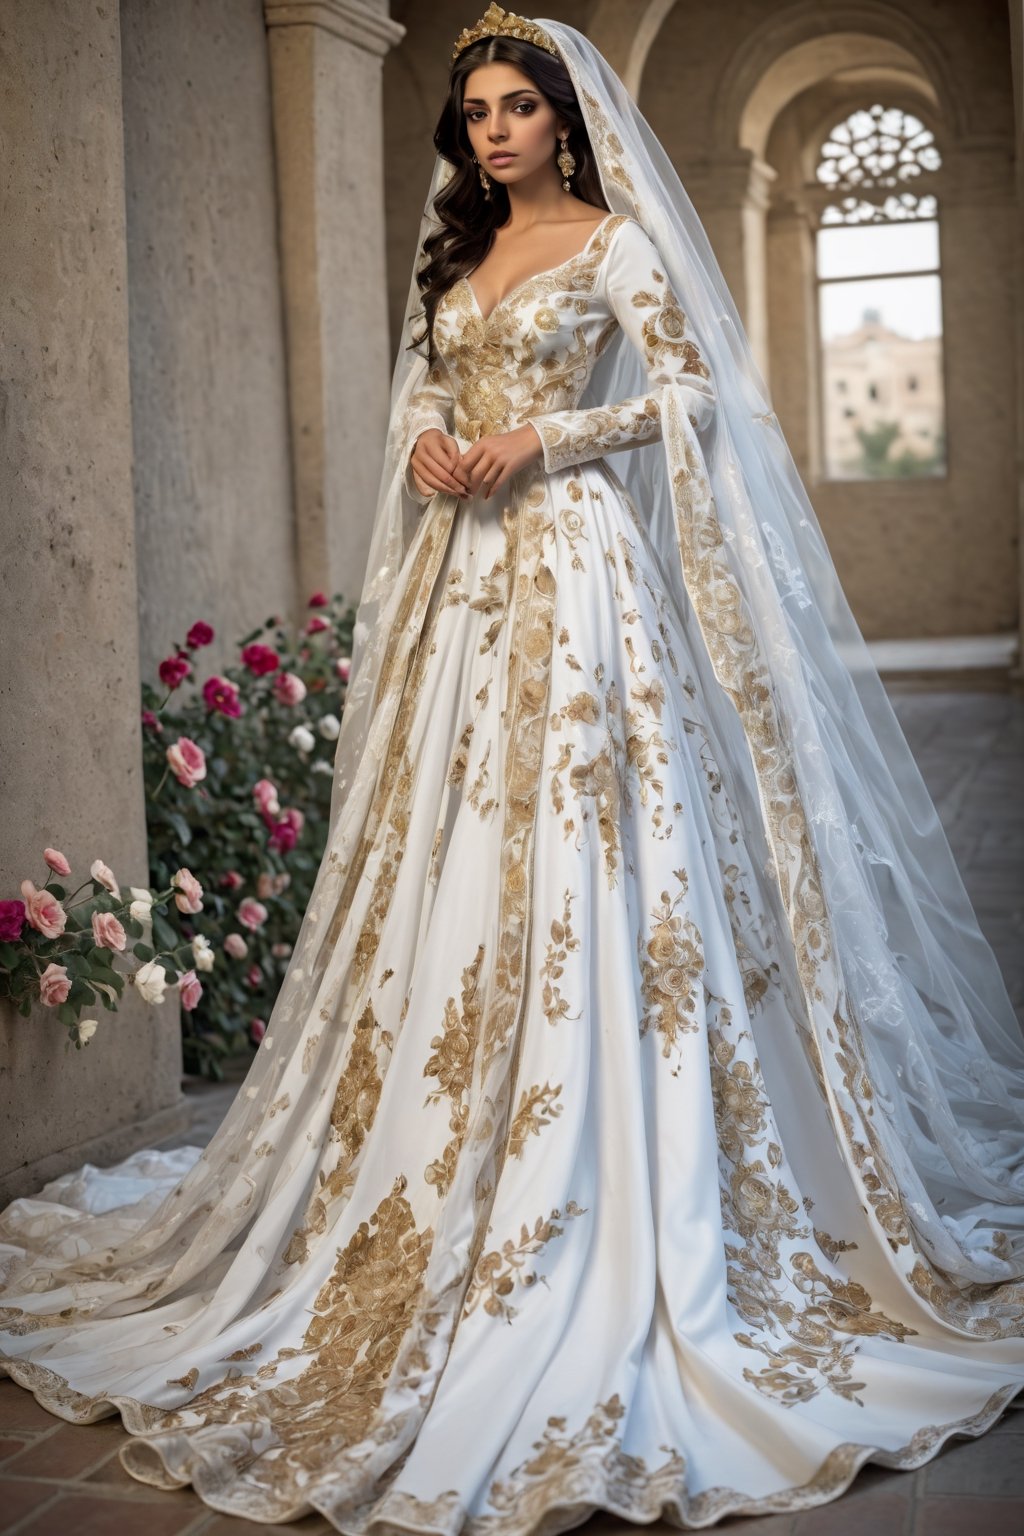 Gorgeous  Persian  girl,
 gorgeous pure white bridal gown, mysterious beauty, exquisite materials such as silk and satin, elaborate embroidery and lace work,((Gold embroidered dress with butterfly motif)),
 flowing silhouette dress, voluminous skirt and wide sleeves, decorated with beautiful floral motifs and delicate lace,b3rli